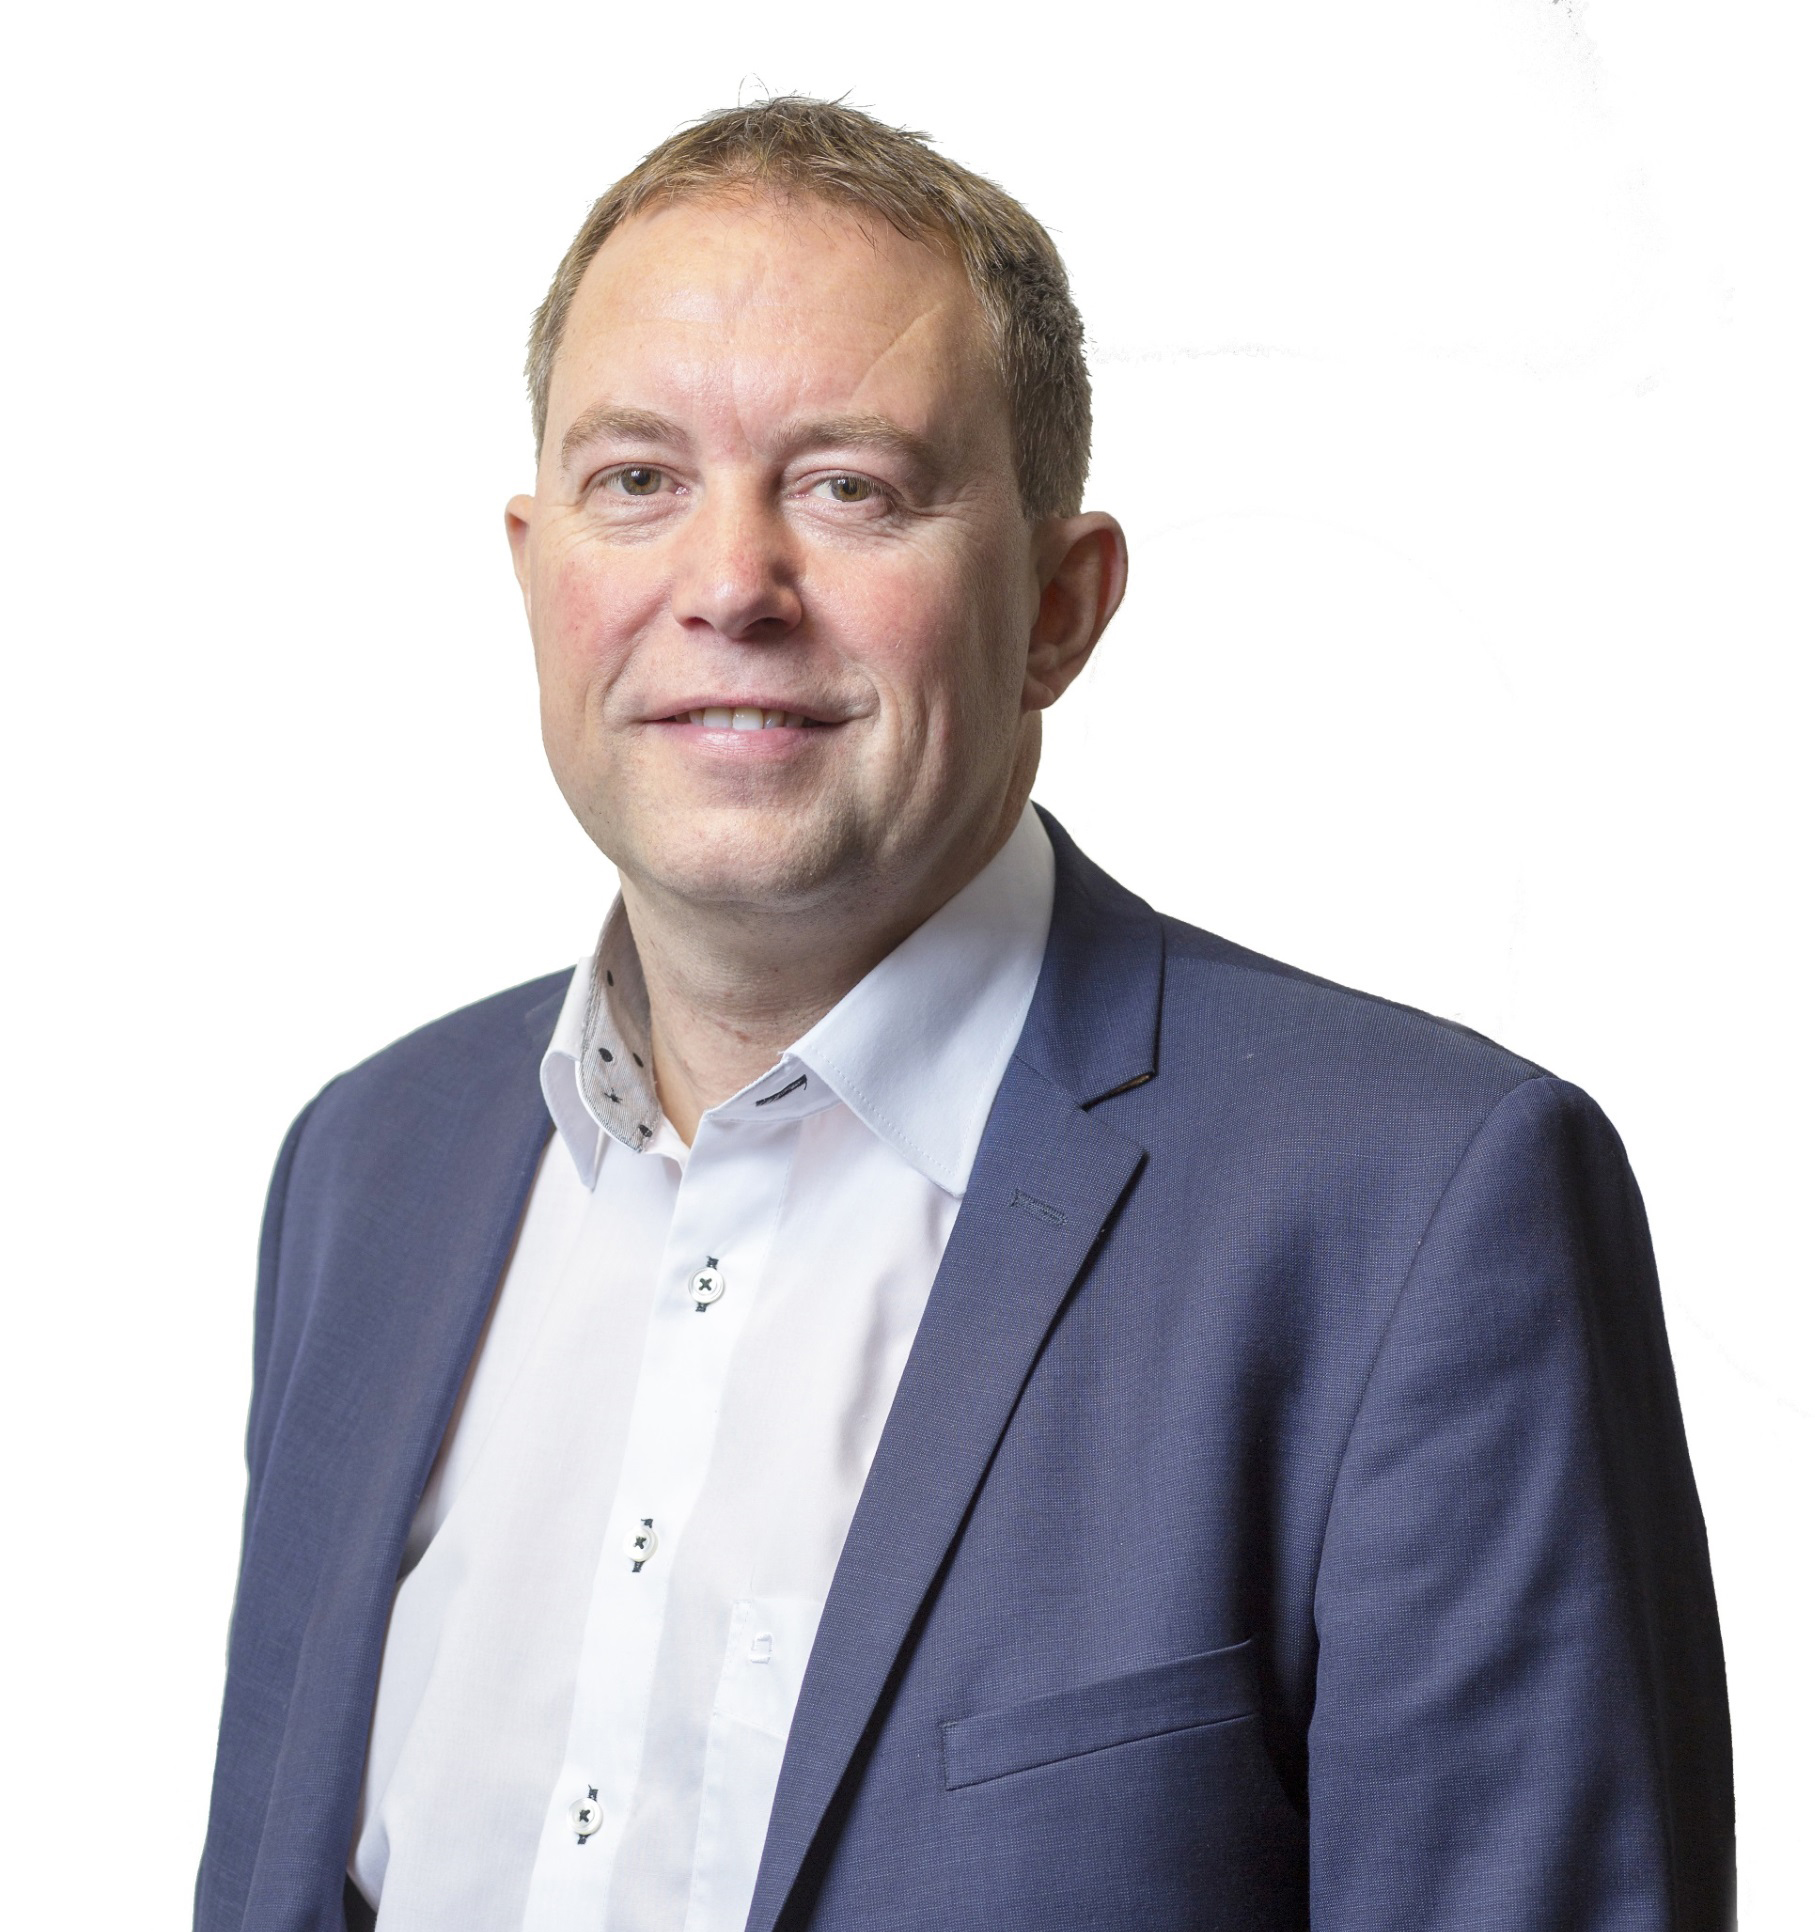 Steve Coleby joins Lovell as Managing Director